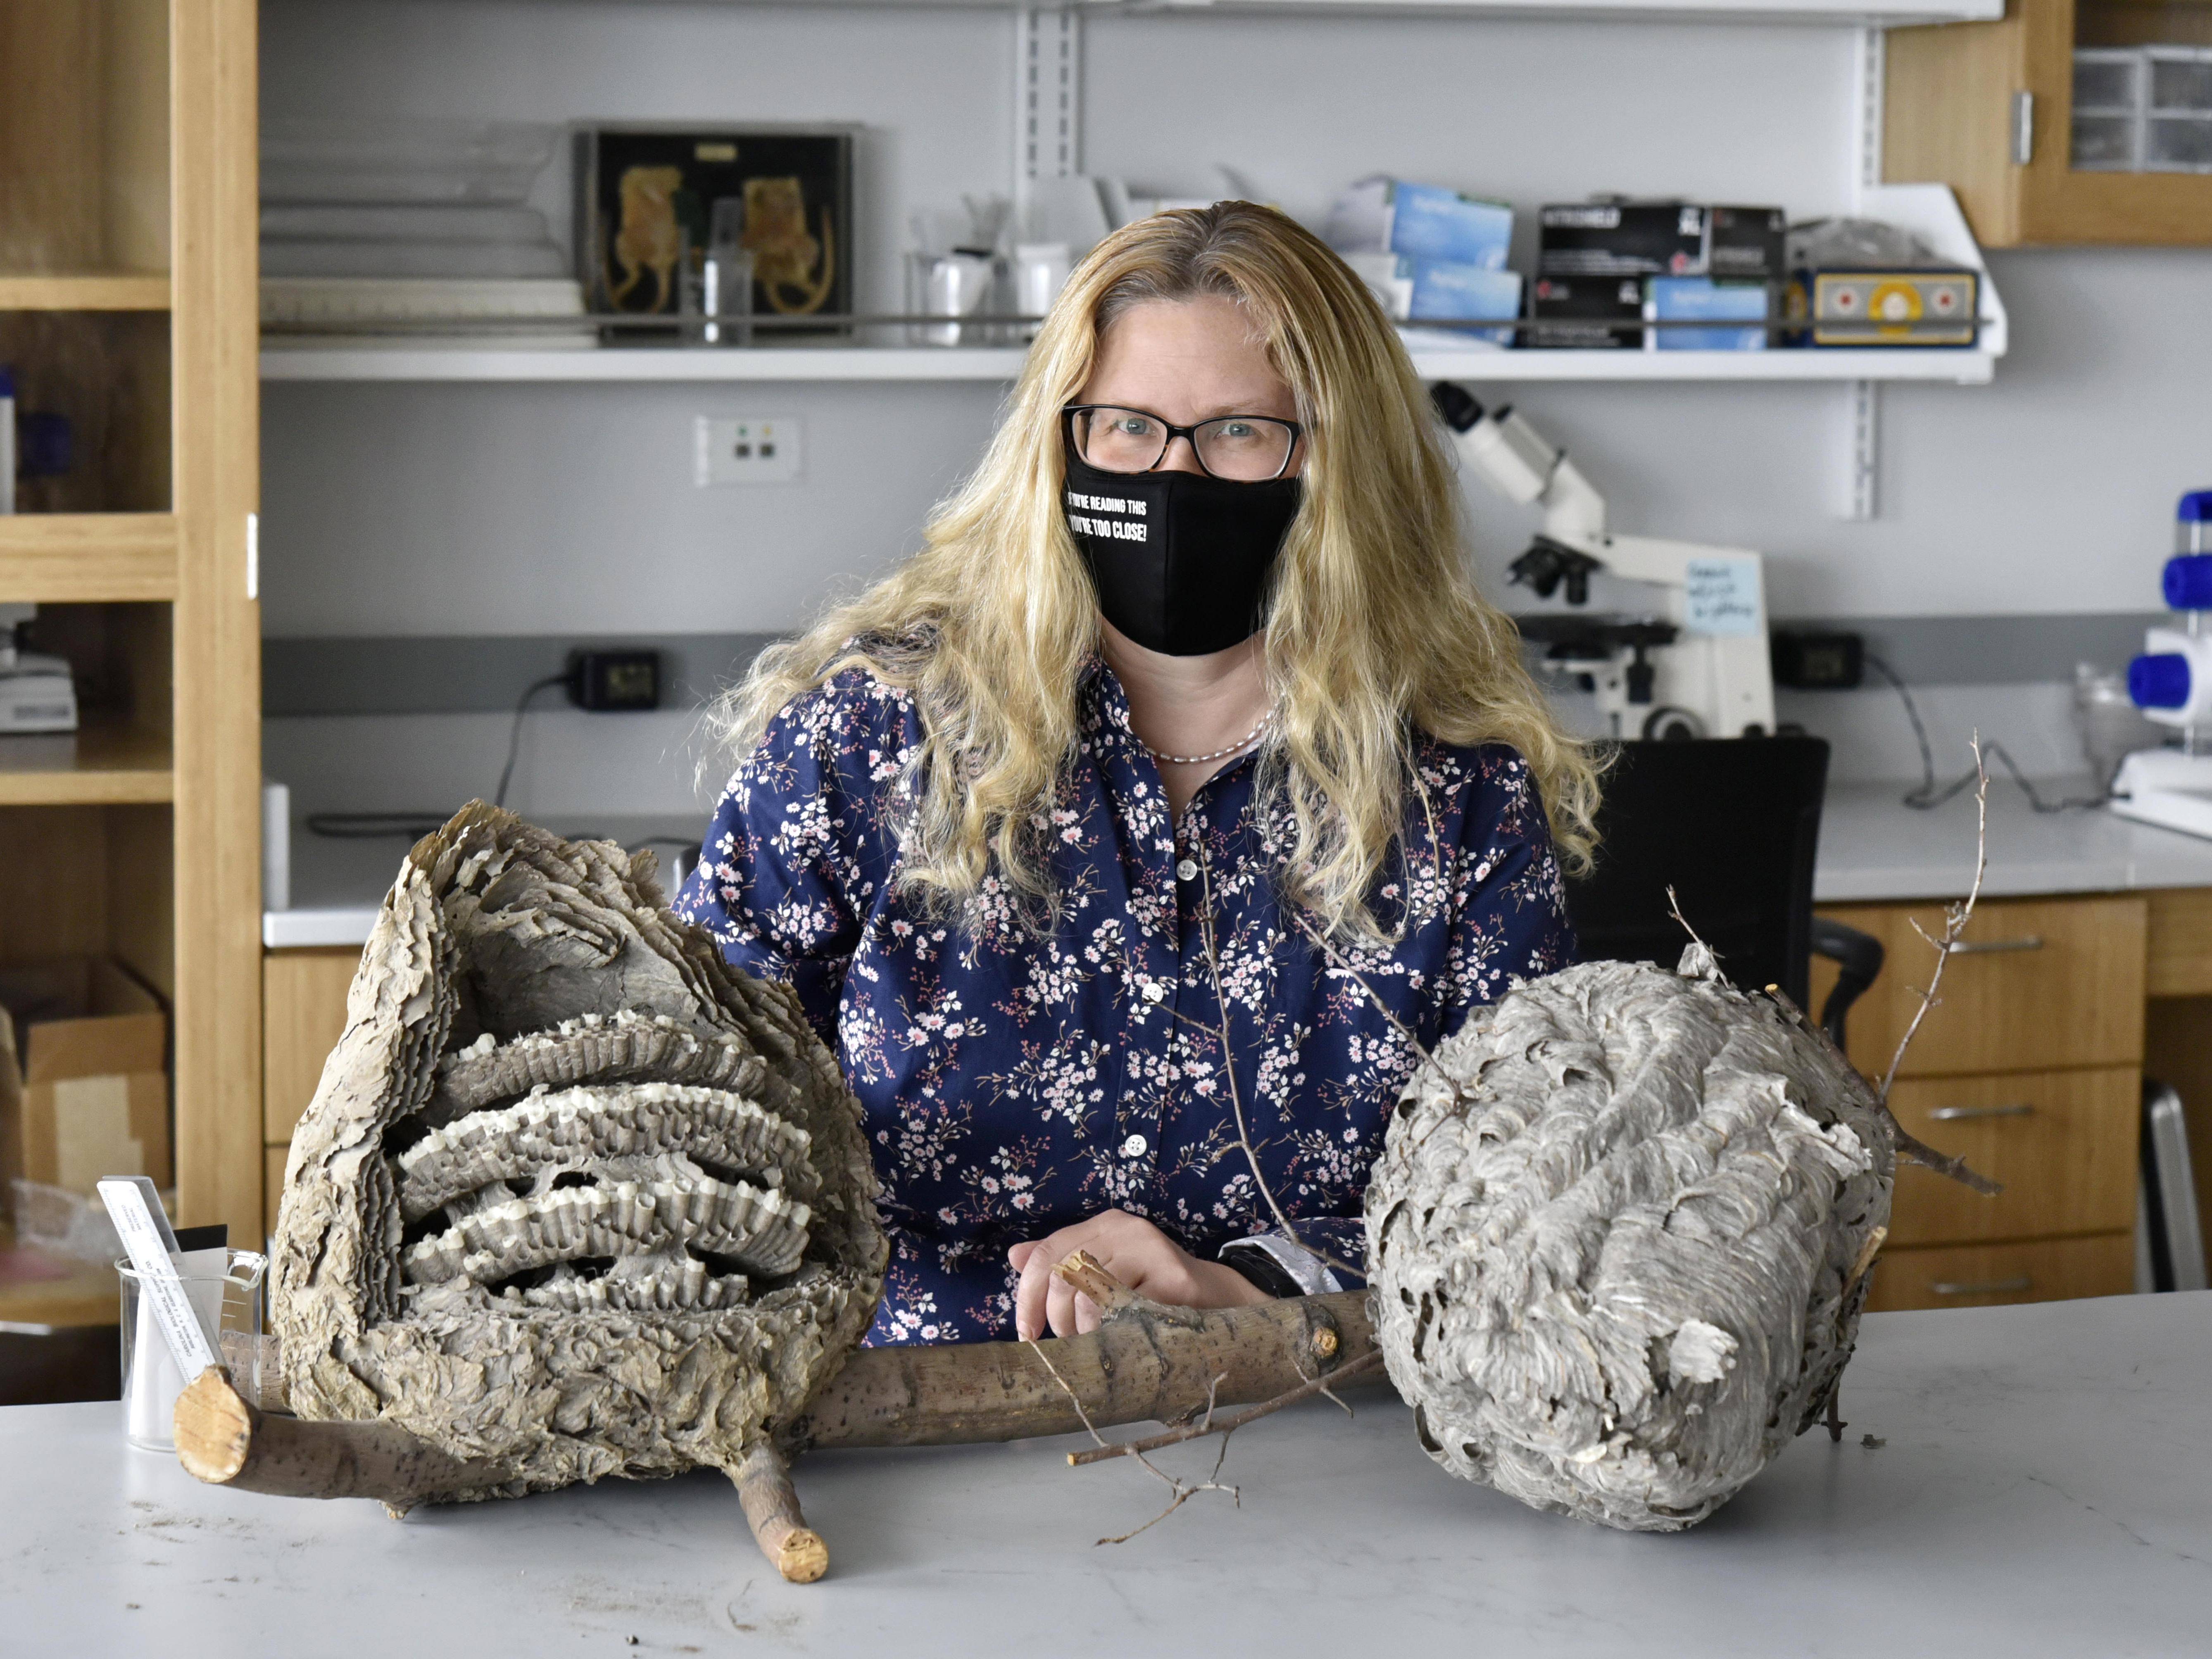 Biological sciences faculty member Karen Sime shows the inside of insect nests, one of her research areas